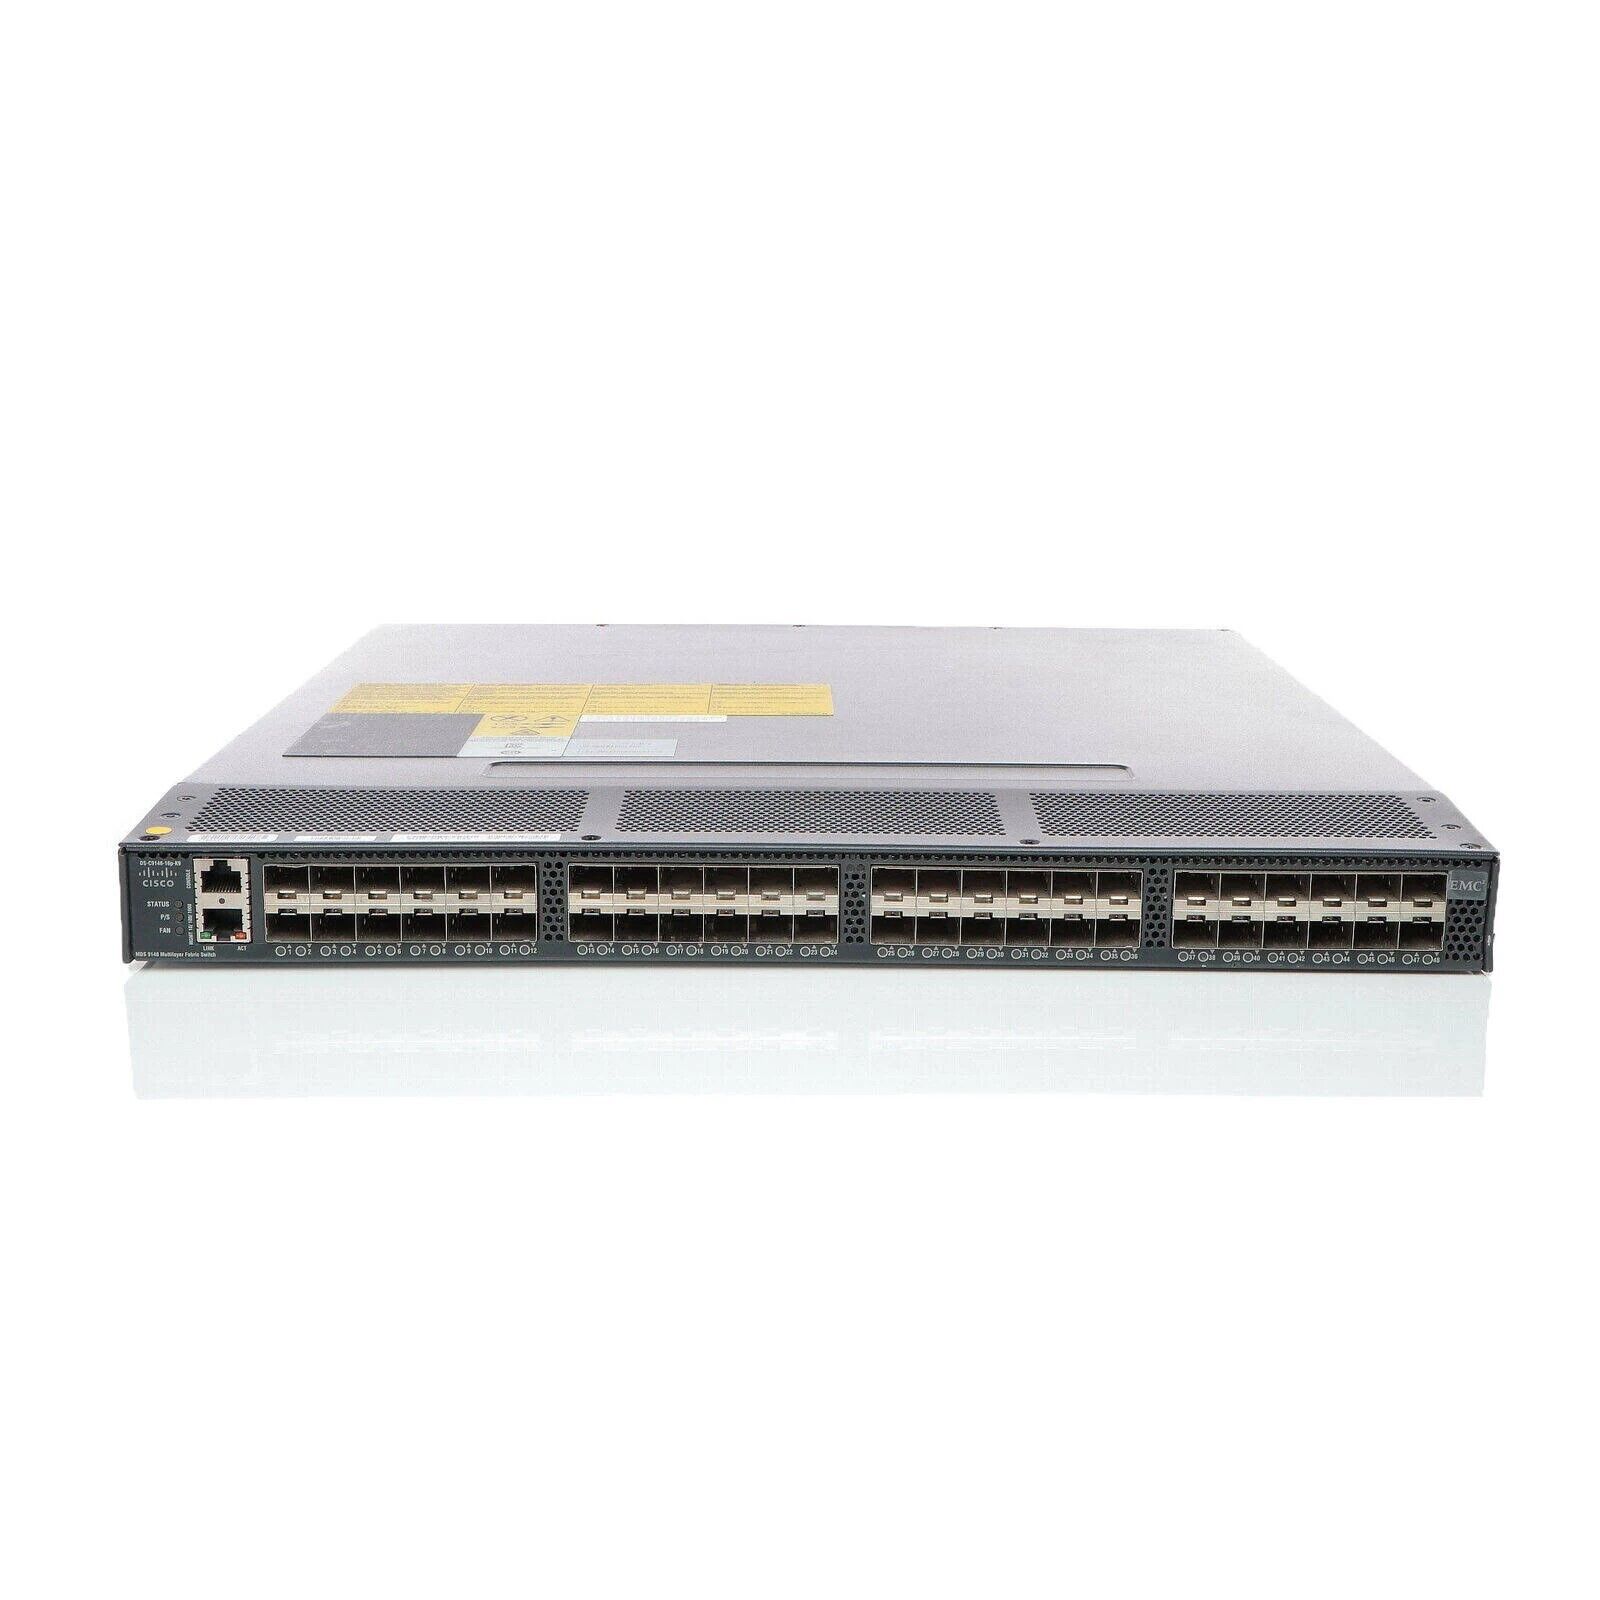 NEW Cisco MDS 9148 48-Port Multilayer Fabric Network Switch Fibre Channel